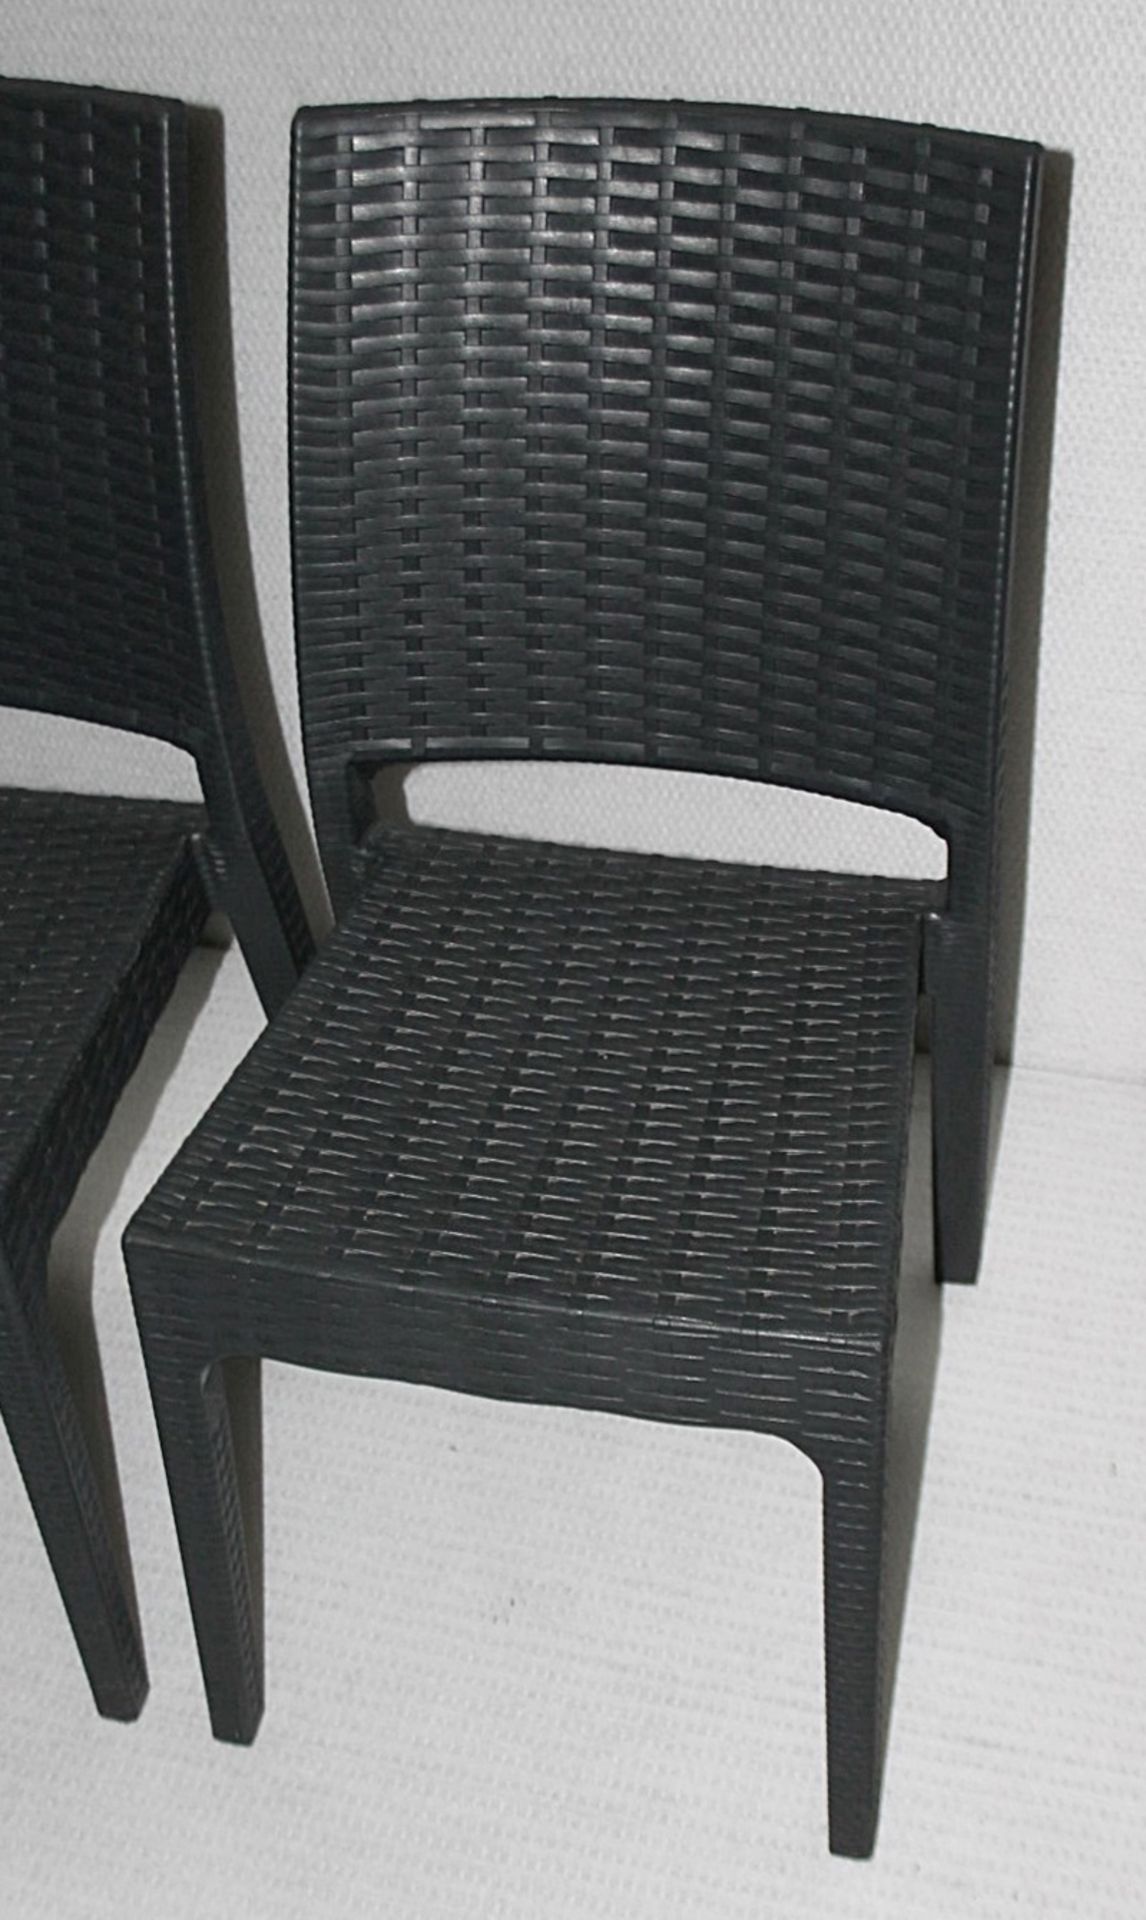 8 x SIESTA EXCLUSIVE 'Florida' Commercial Stackable Rattan-style Chairs In Dark Grey - CL987 - - Image 4 of 13